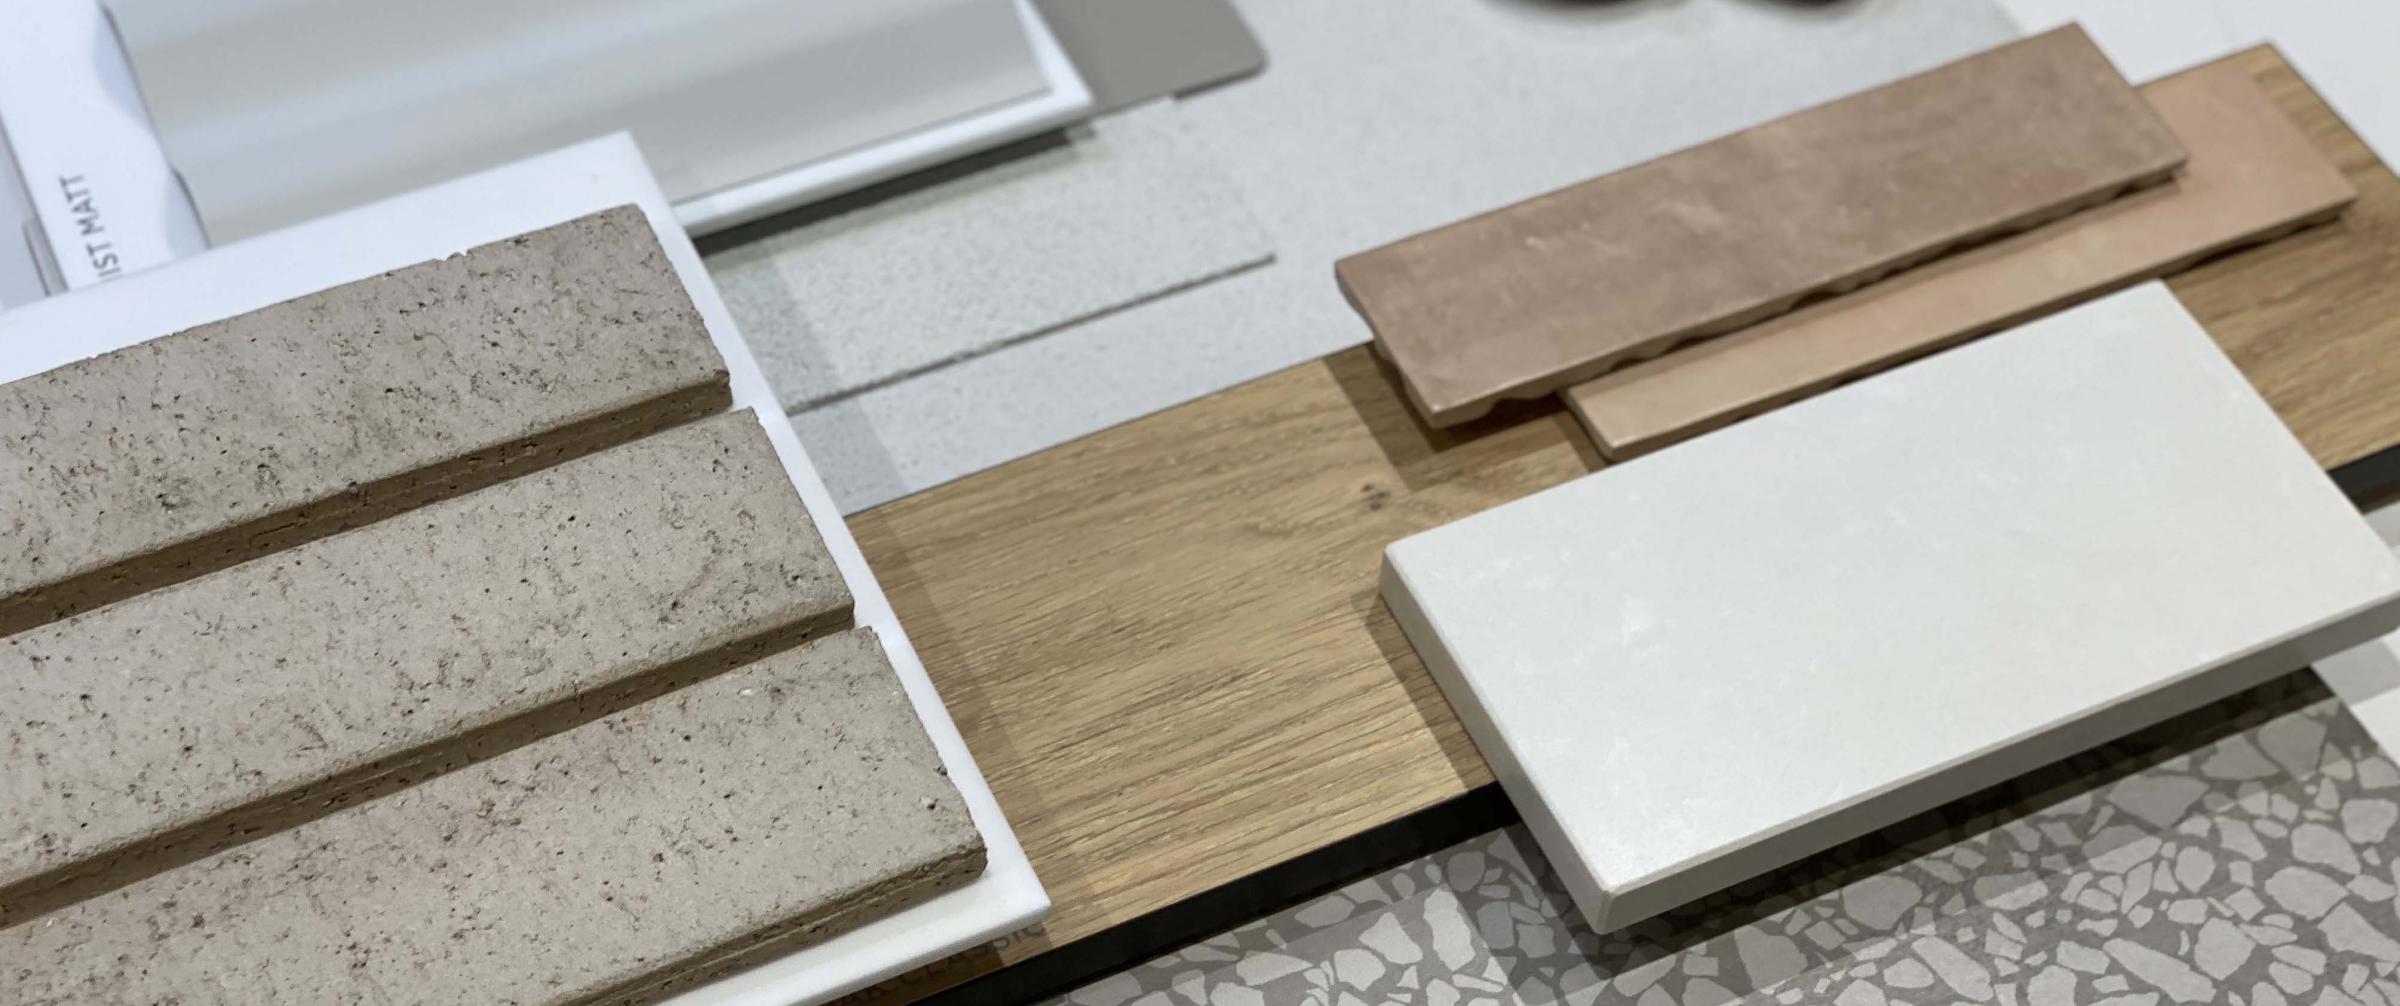 'Cycladic Coastal Style' Flatlay by Metricon Homes. COLORBOND® steel